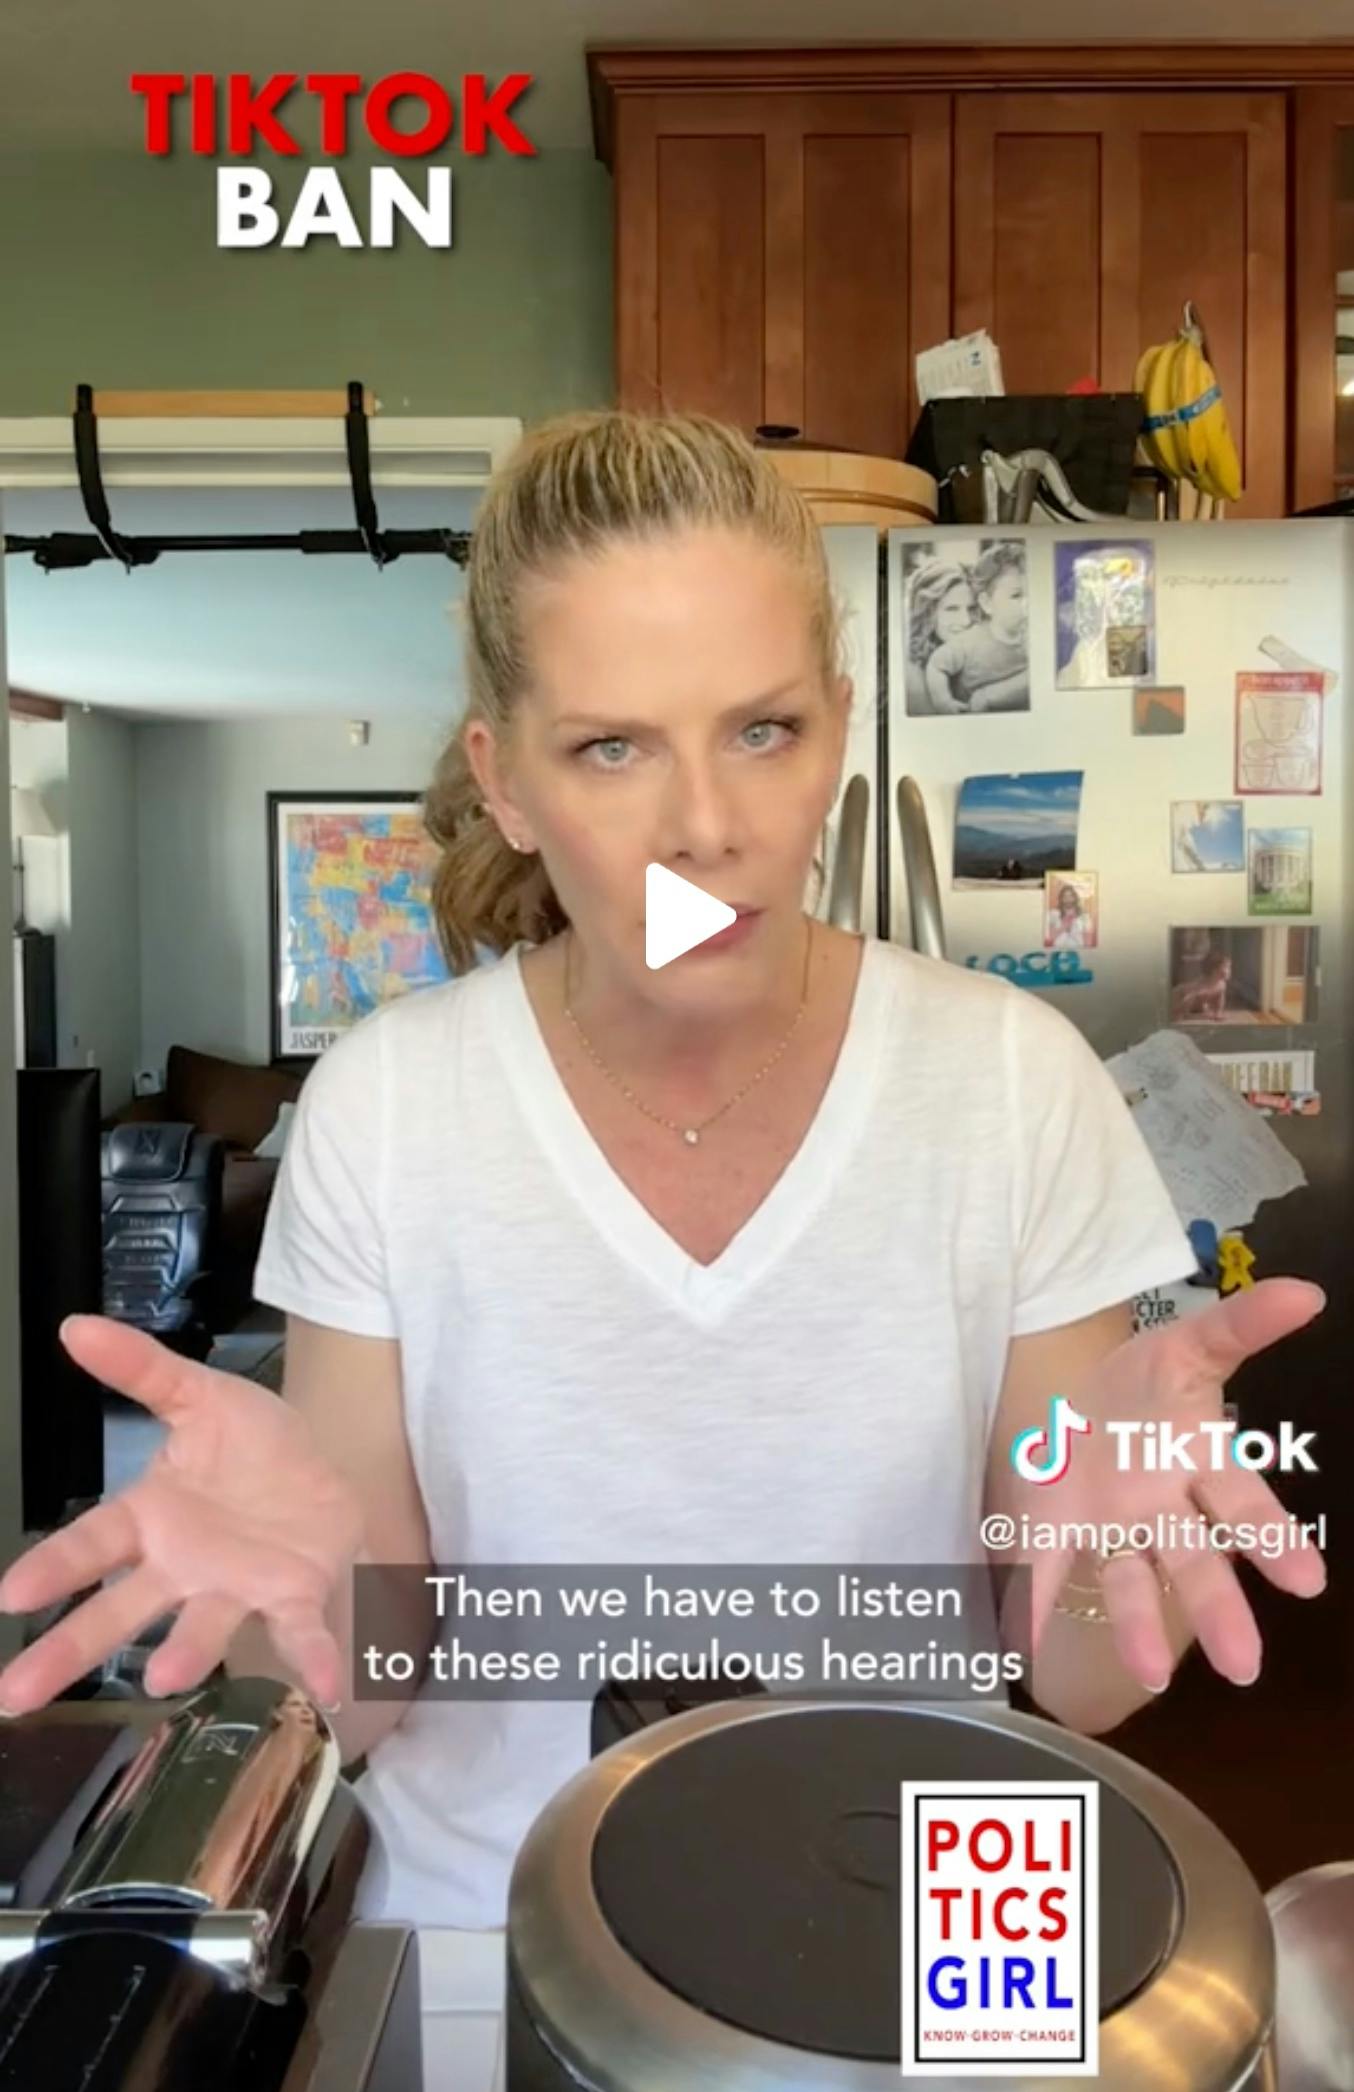 TikTok screen grab. White woman in white tee-shirt, speaking passionately with hands extended.